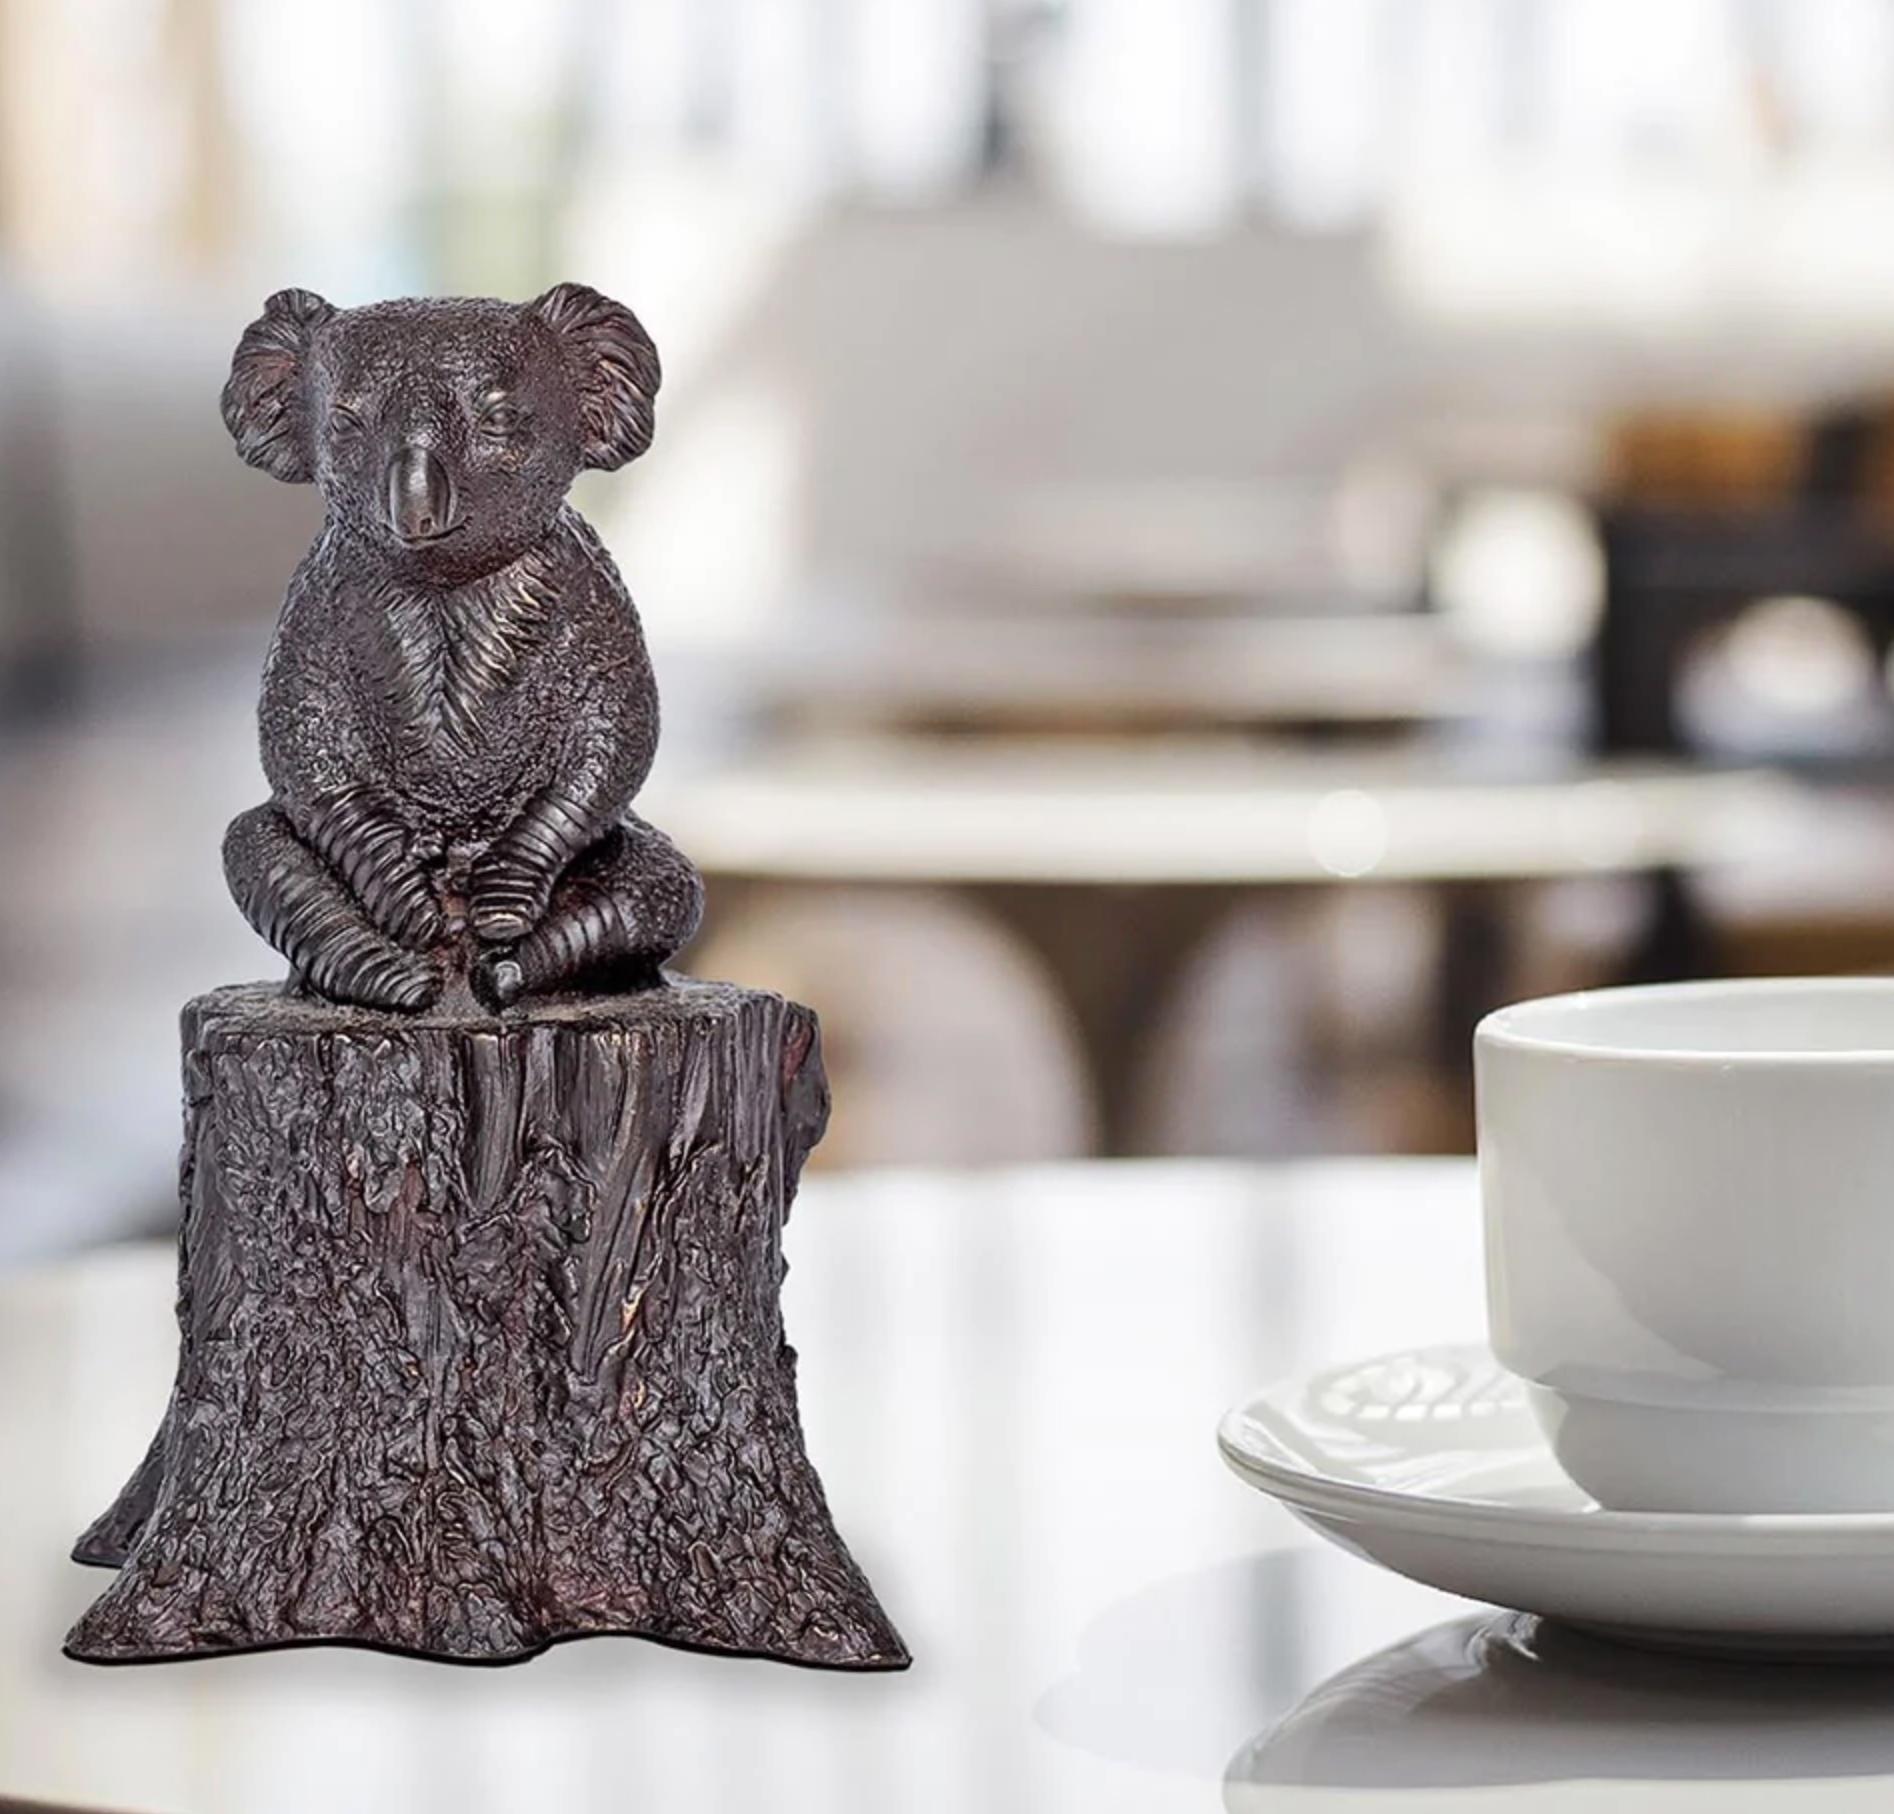 Gillie and Marc Schattner Figurative Sculpture - Authentic Bronze Lewis the koala on log Sculpture by Gillie and Marc